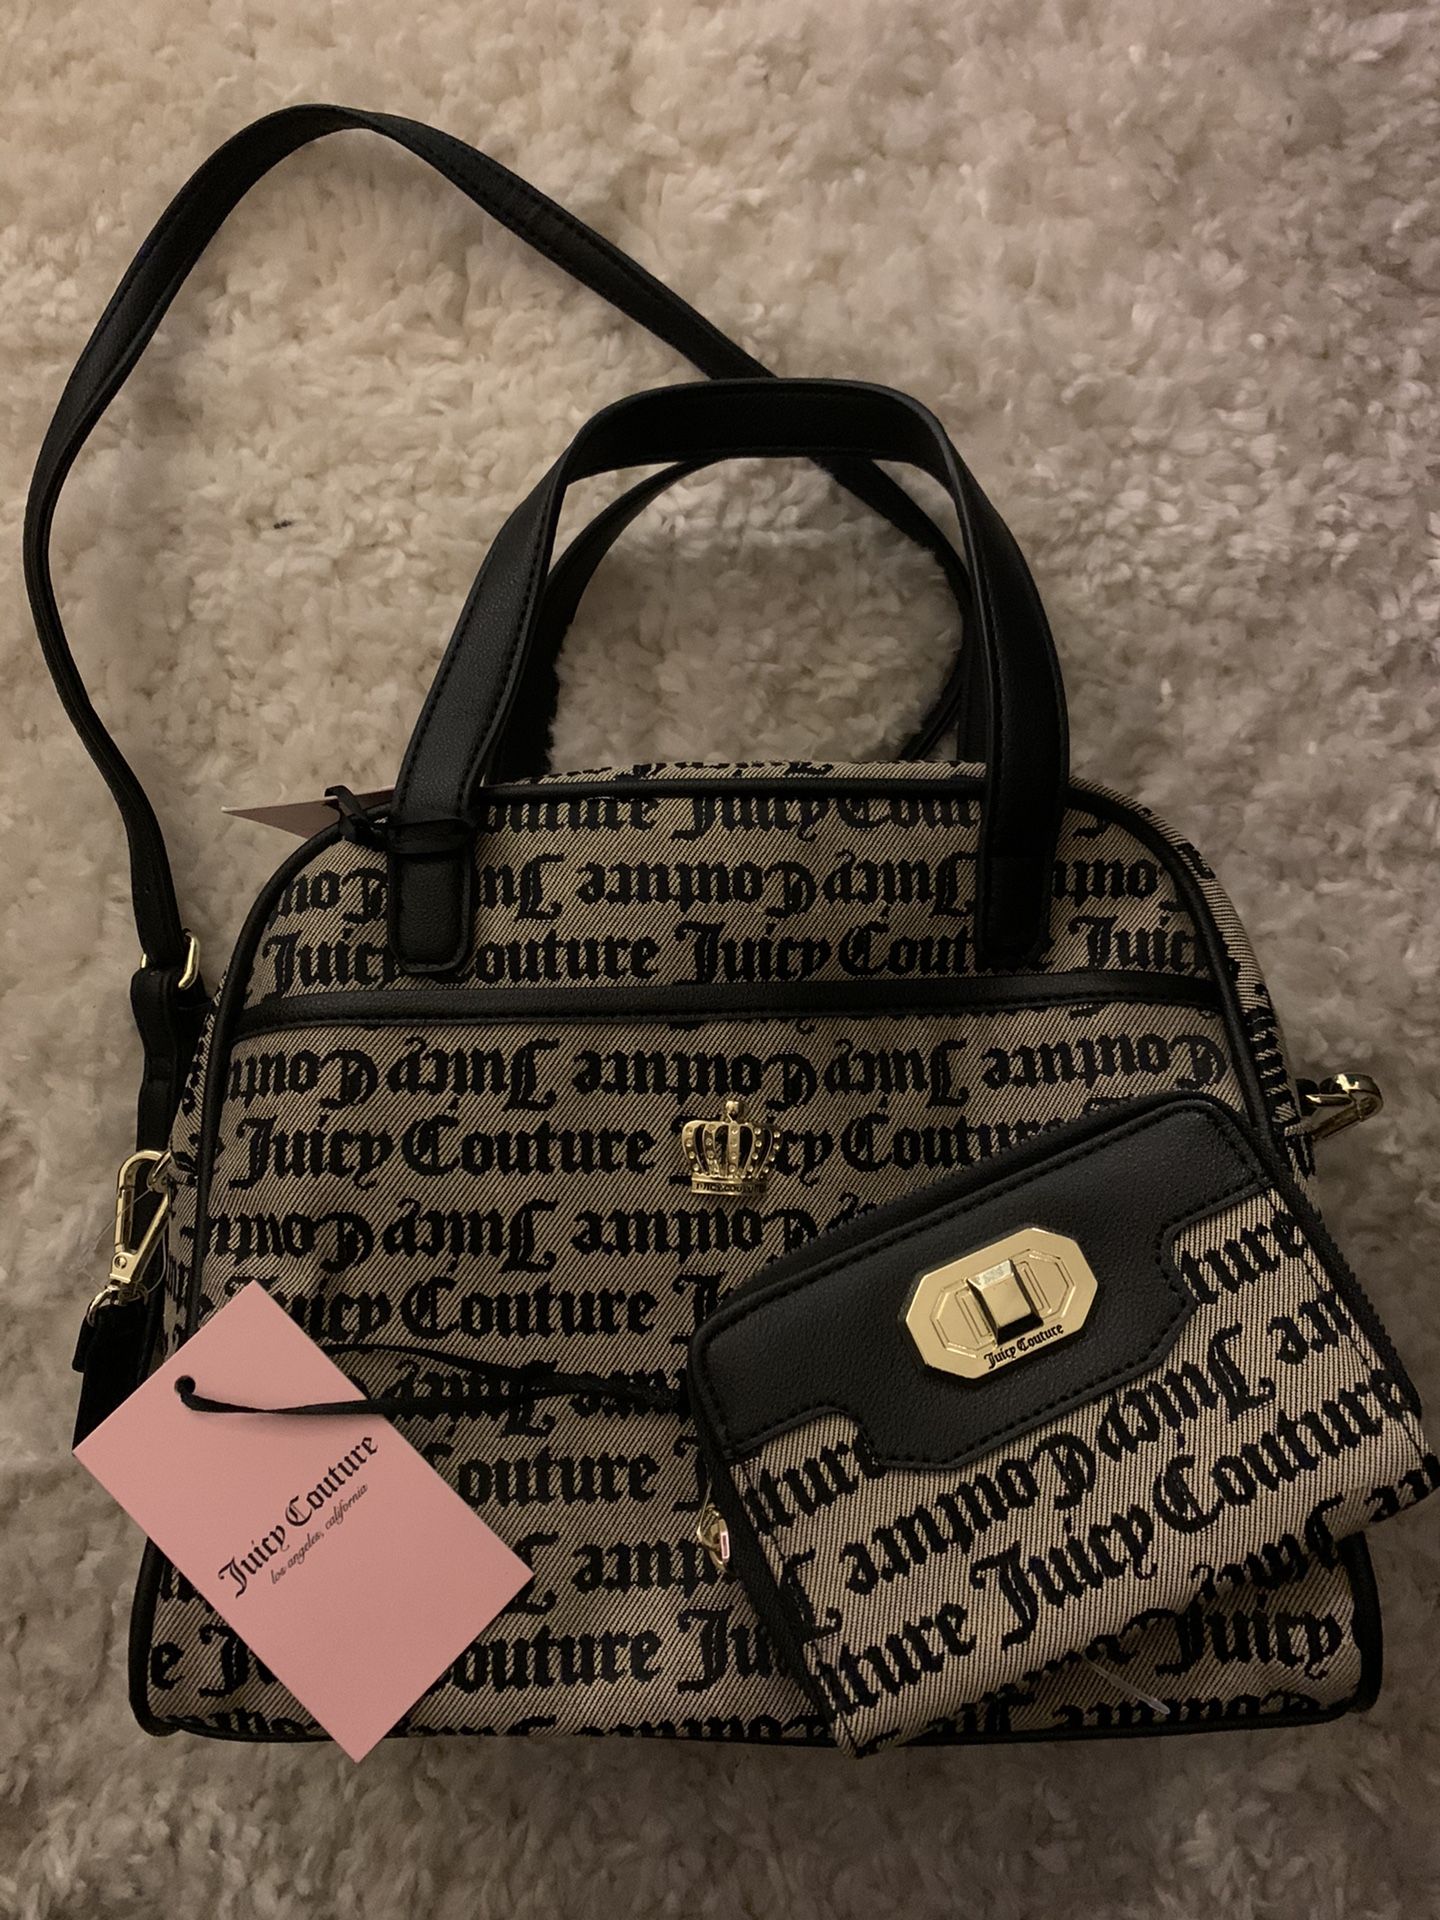 Juicy couture purse and wallet